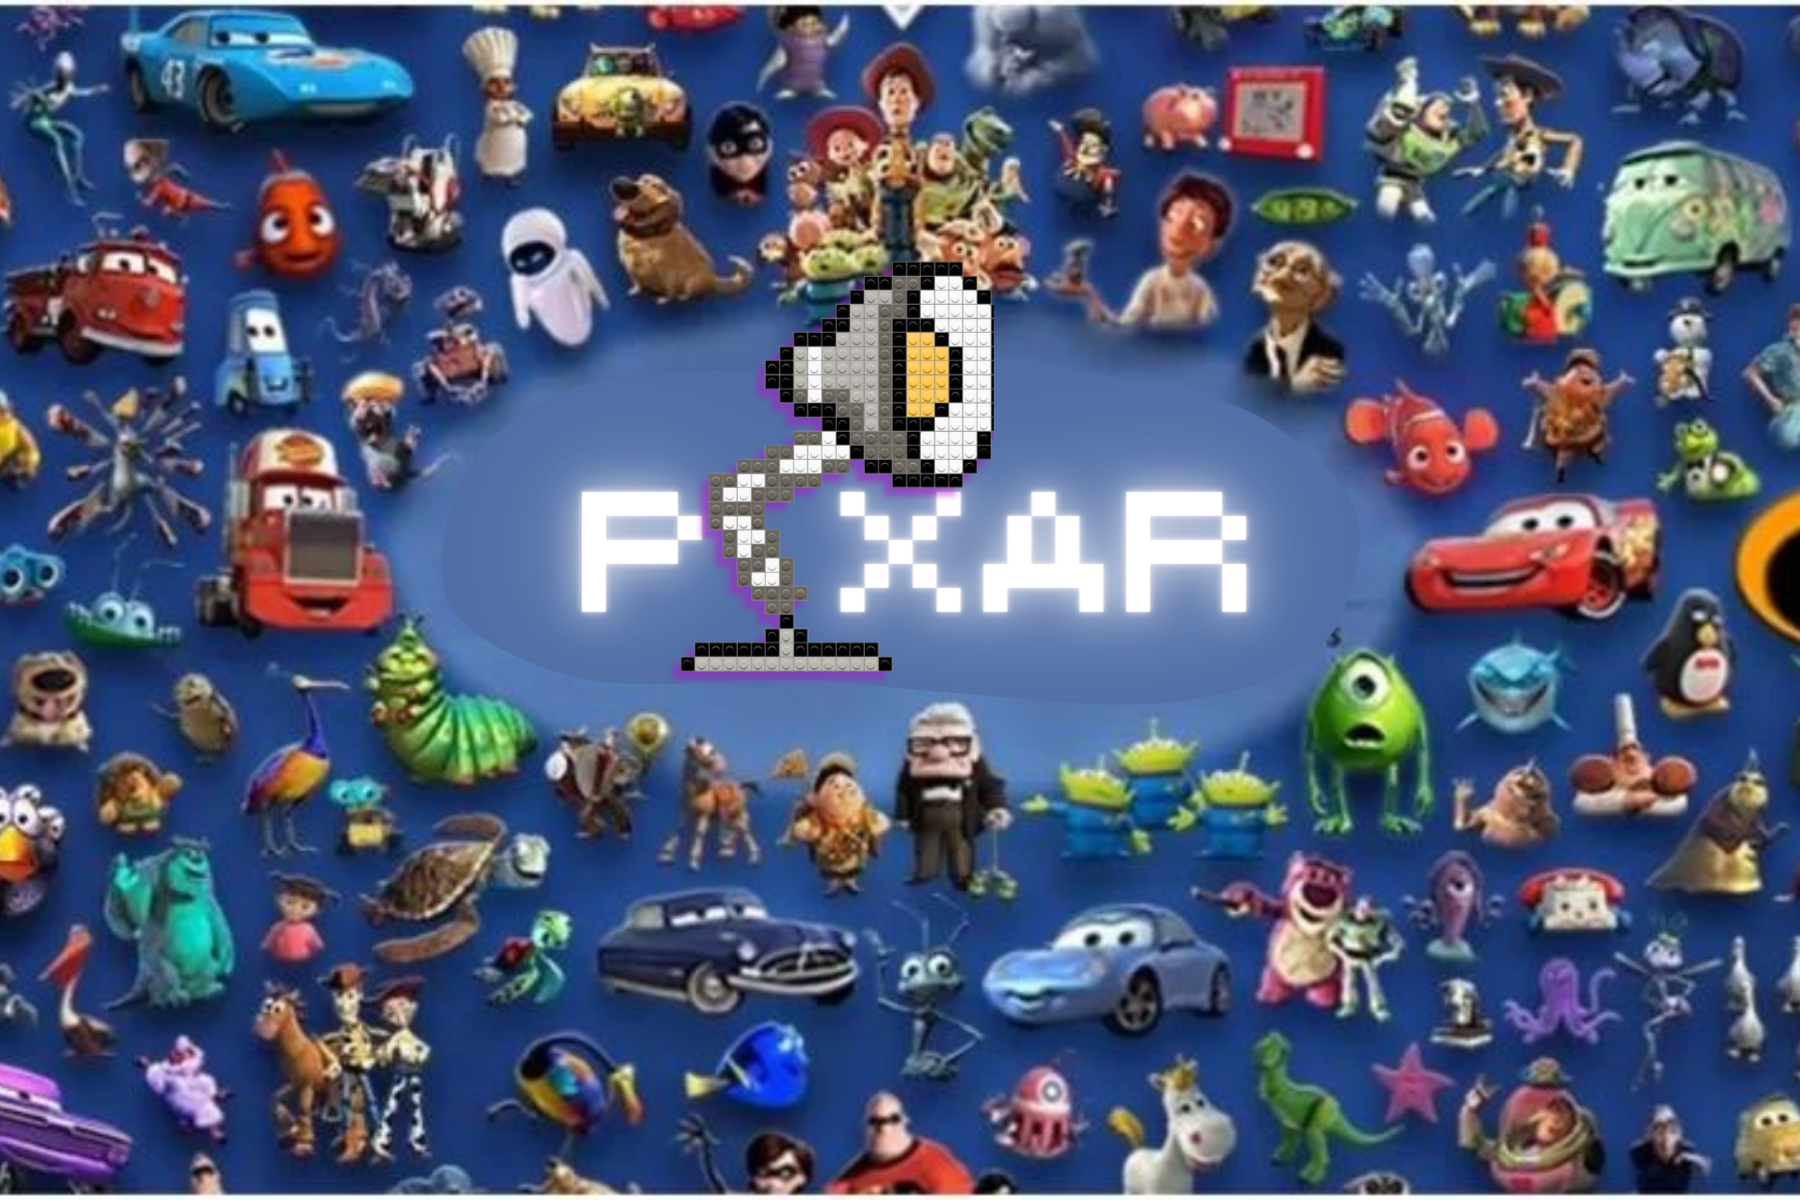 Can You Translate the Emojis to the Pixar Movie? (type in answer)